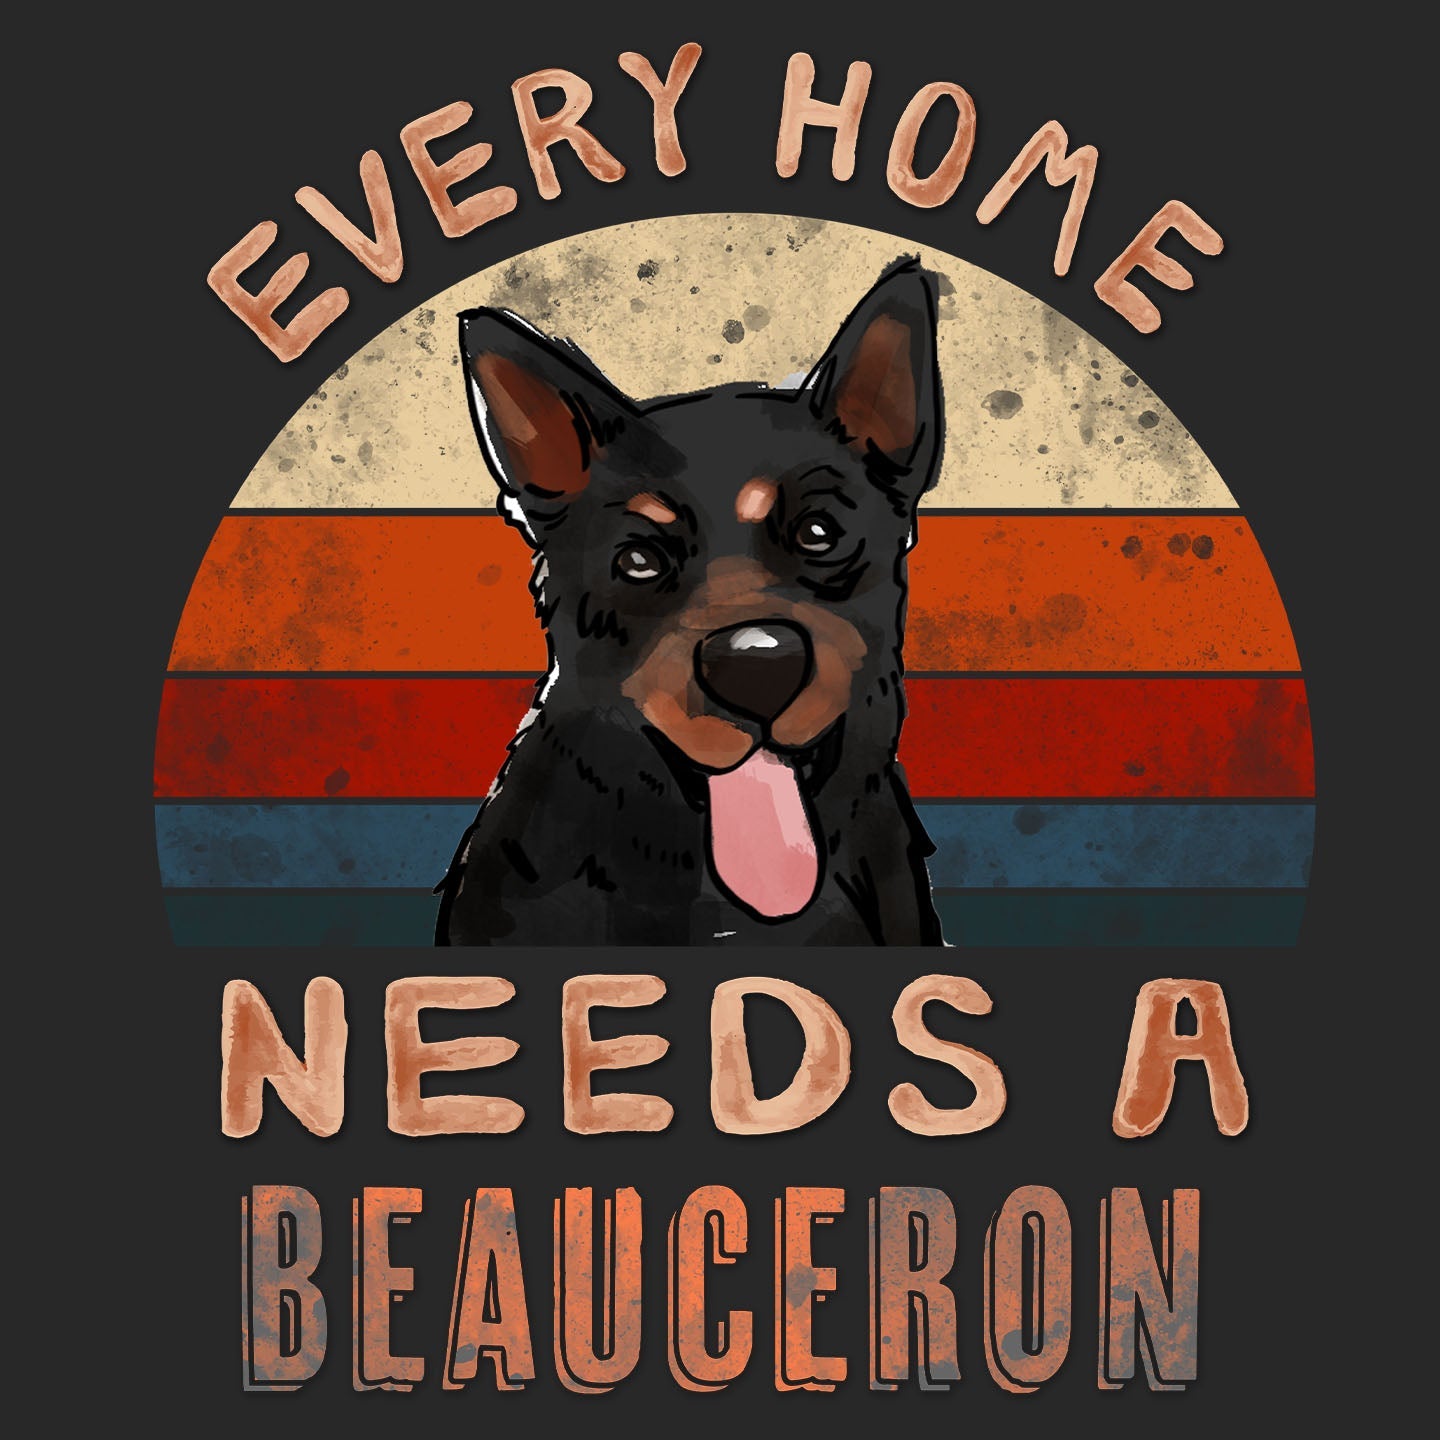 Every Home Needs a Beauceron - Adult Unisex T-Shirt